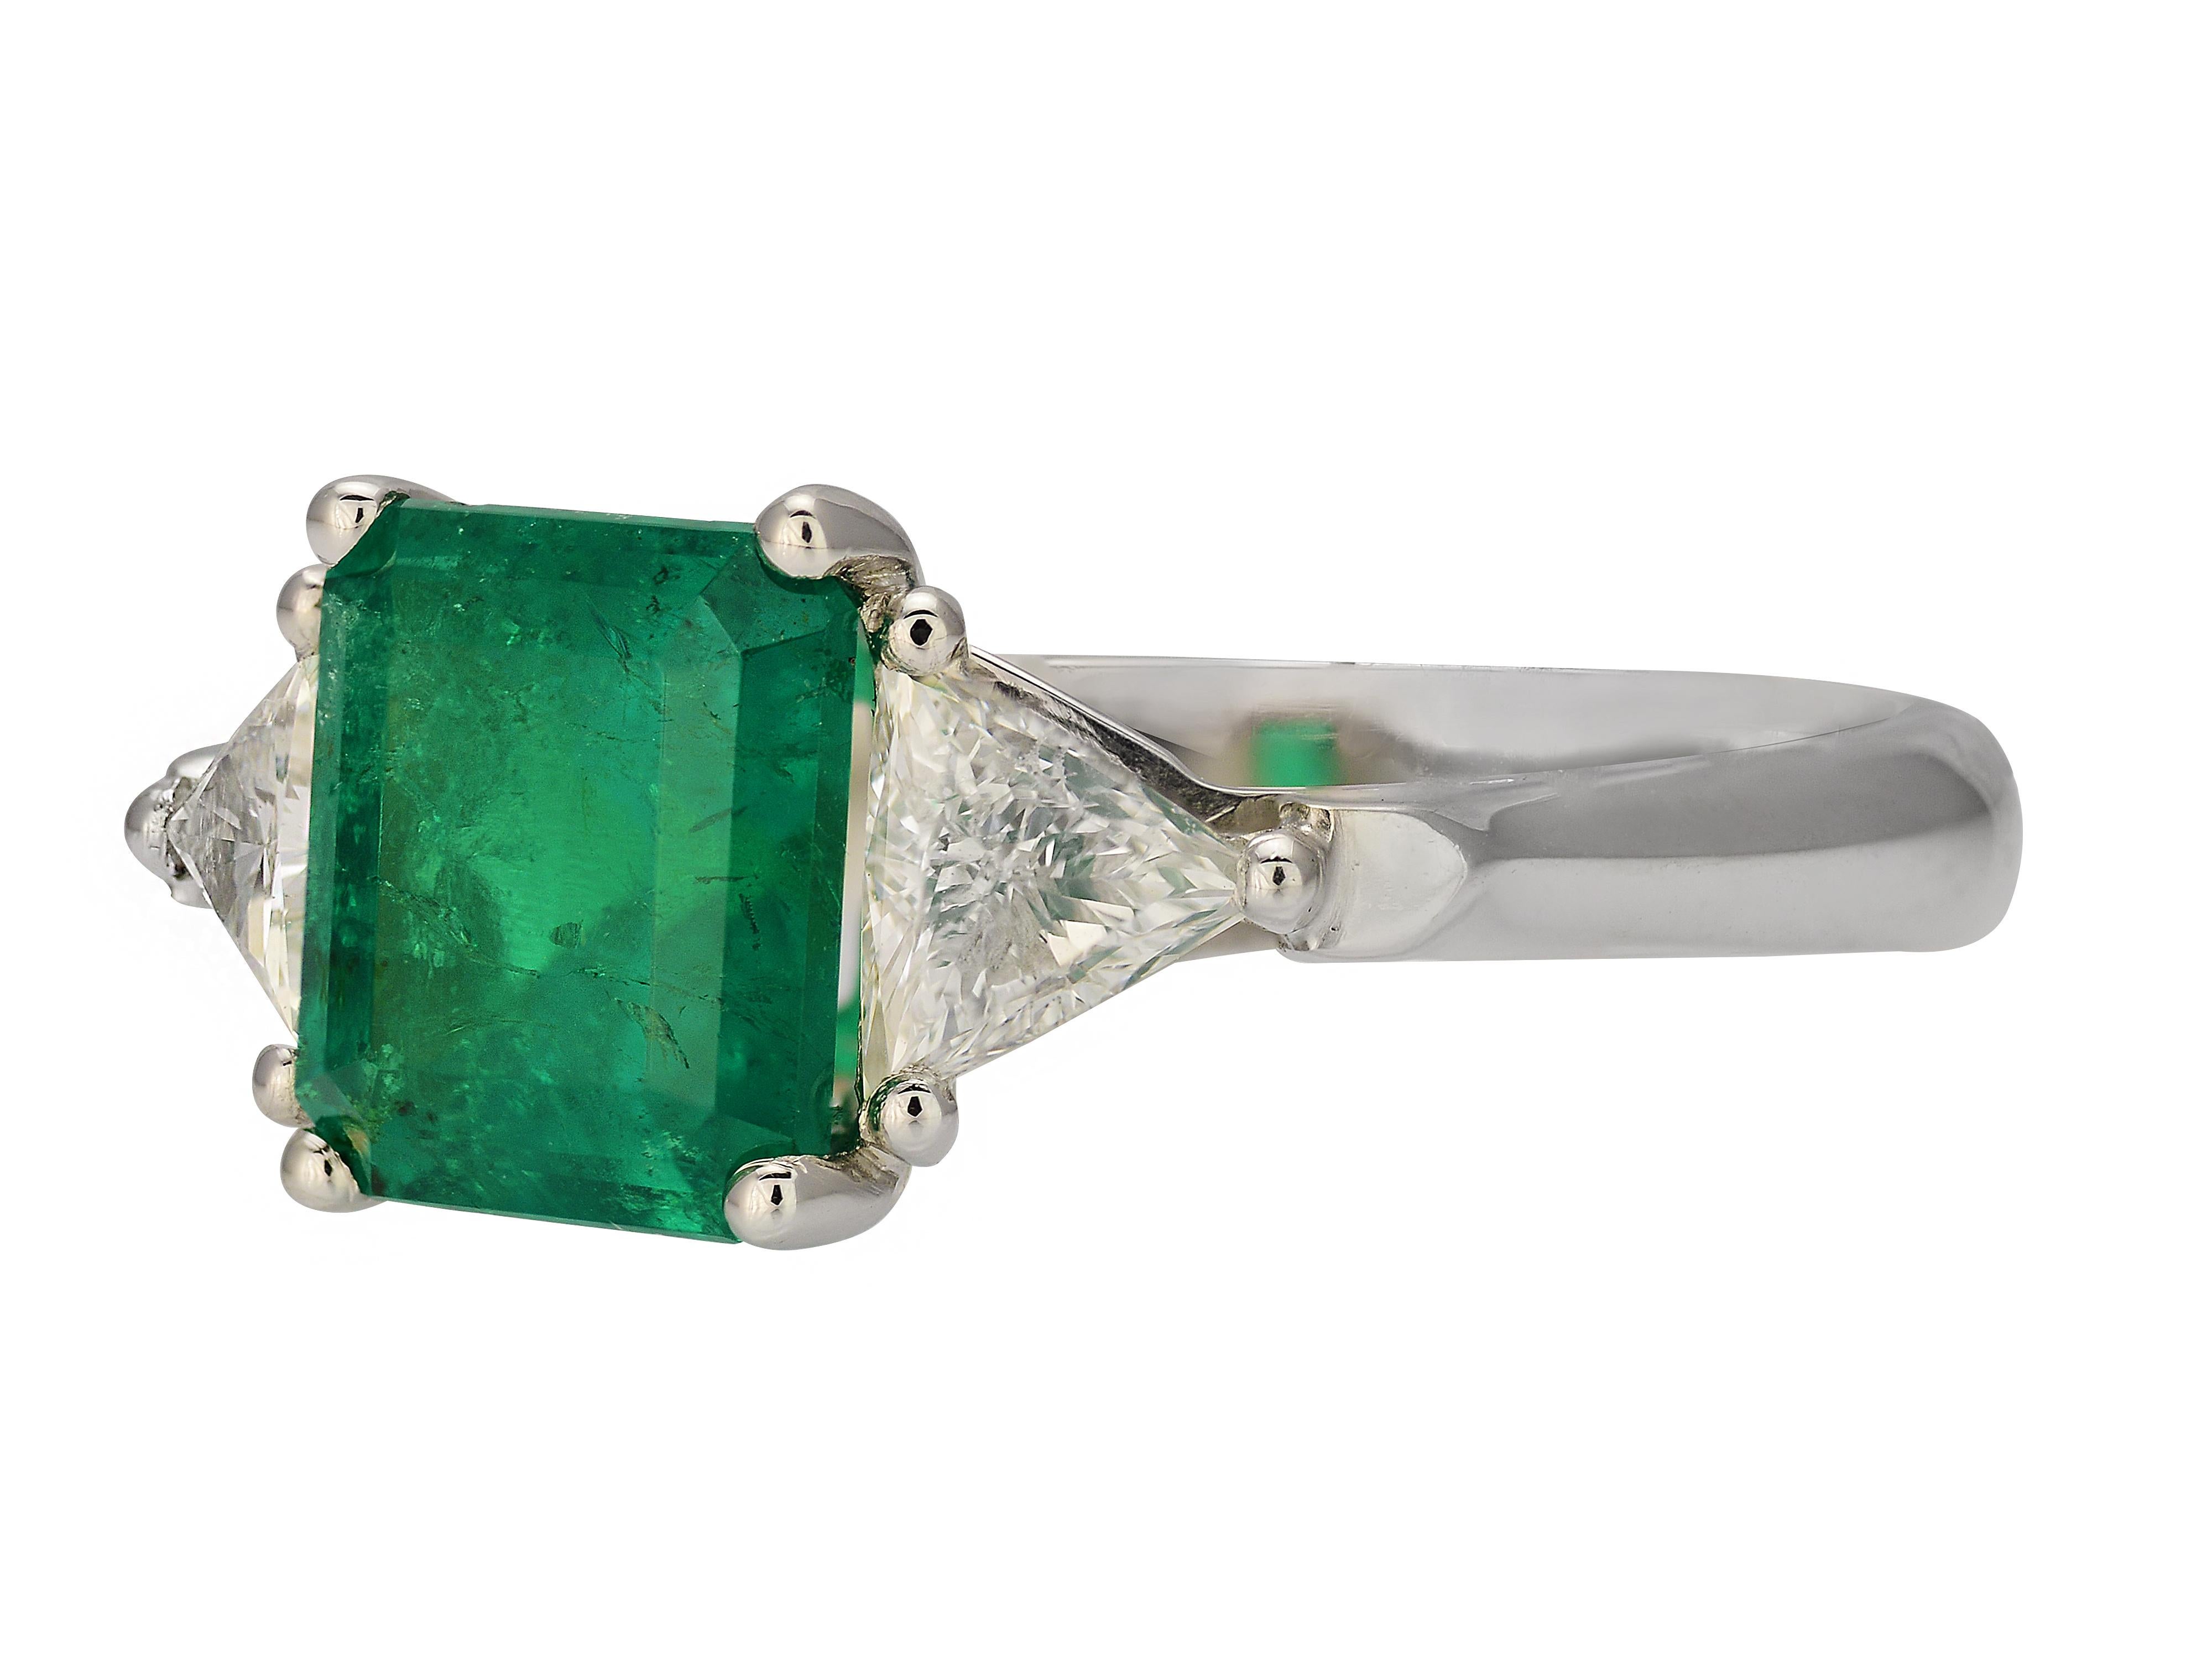 Platinum Three Stone Cocktail Ring Featuring A 1.95 Carat Prong Set Square Cut Cushion Emerald. The Center Stone Is Accented By Two Trilliant Cut Diamonds Of VS Clarity & G Color Totaling 0.46 Carats. Hidden Hearts In Gallery. Finger Size 6;